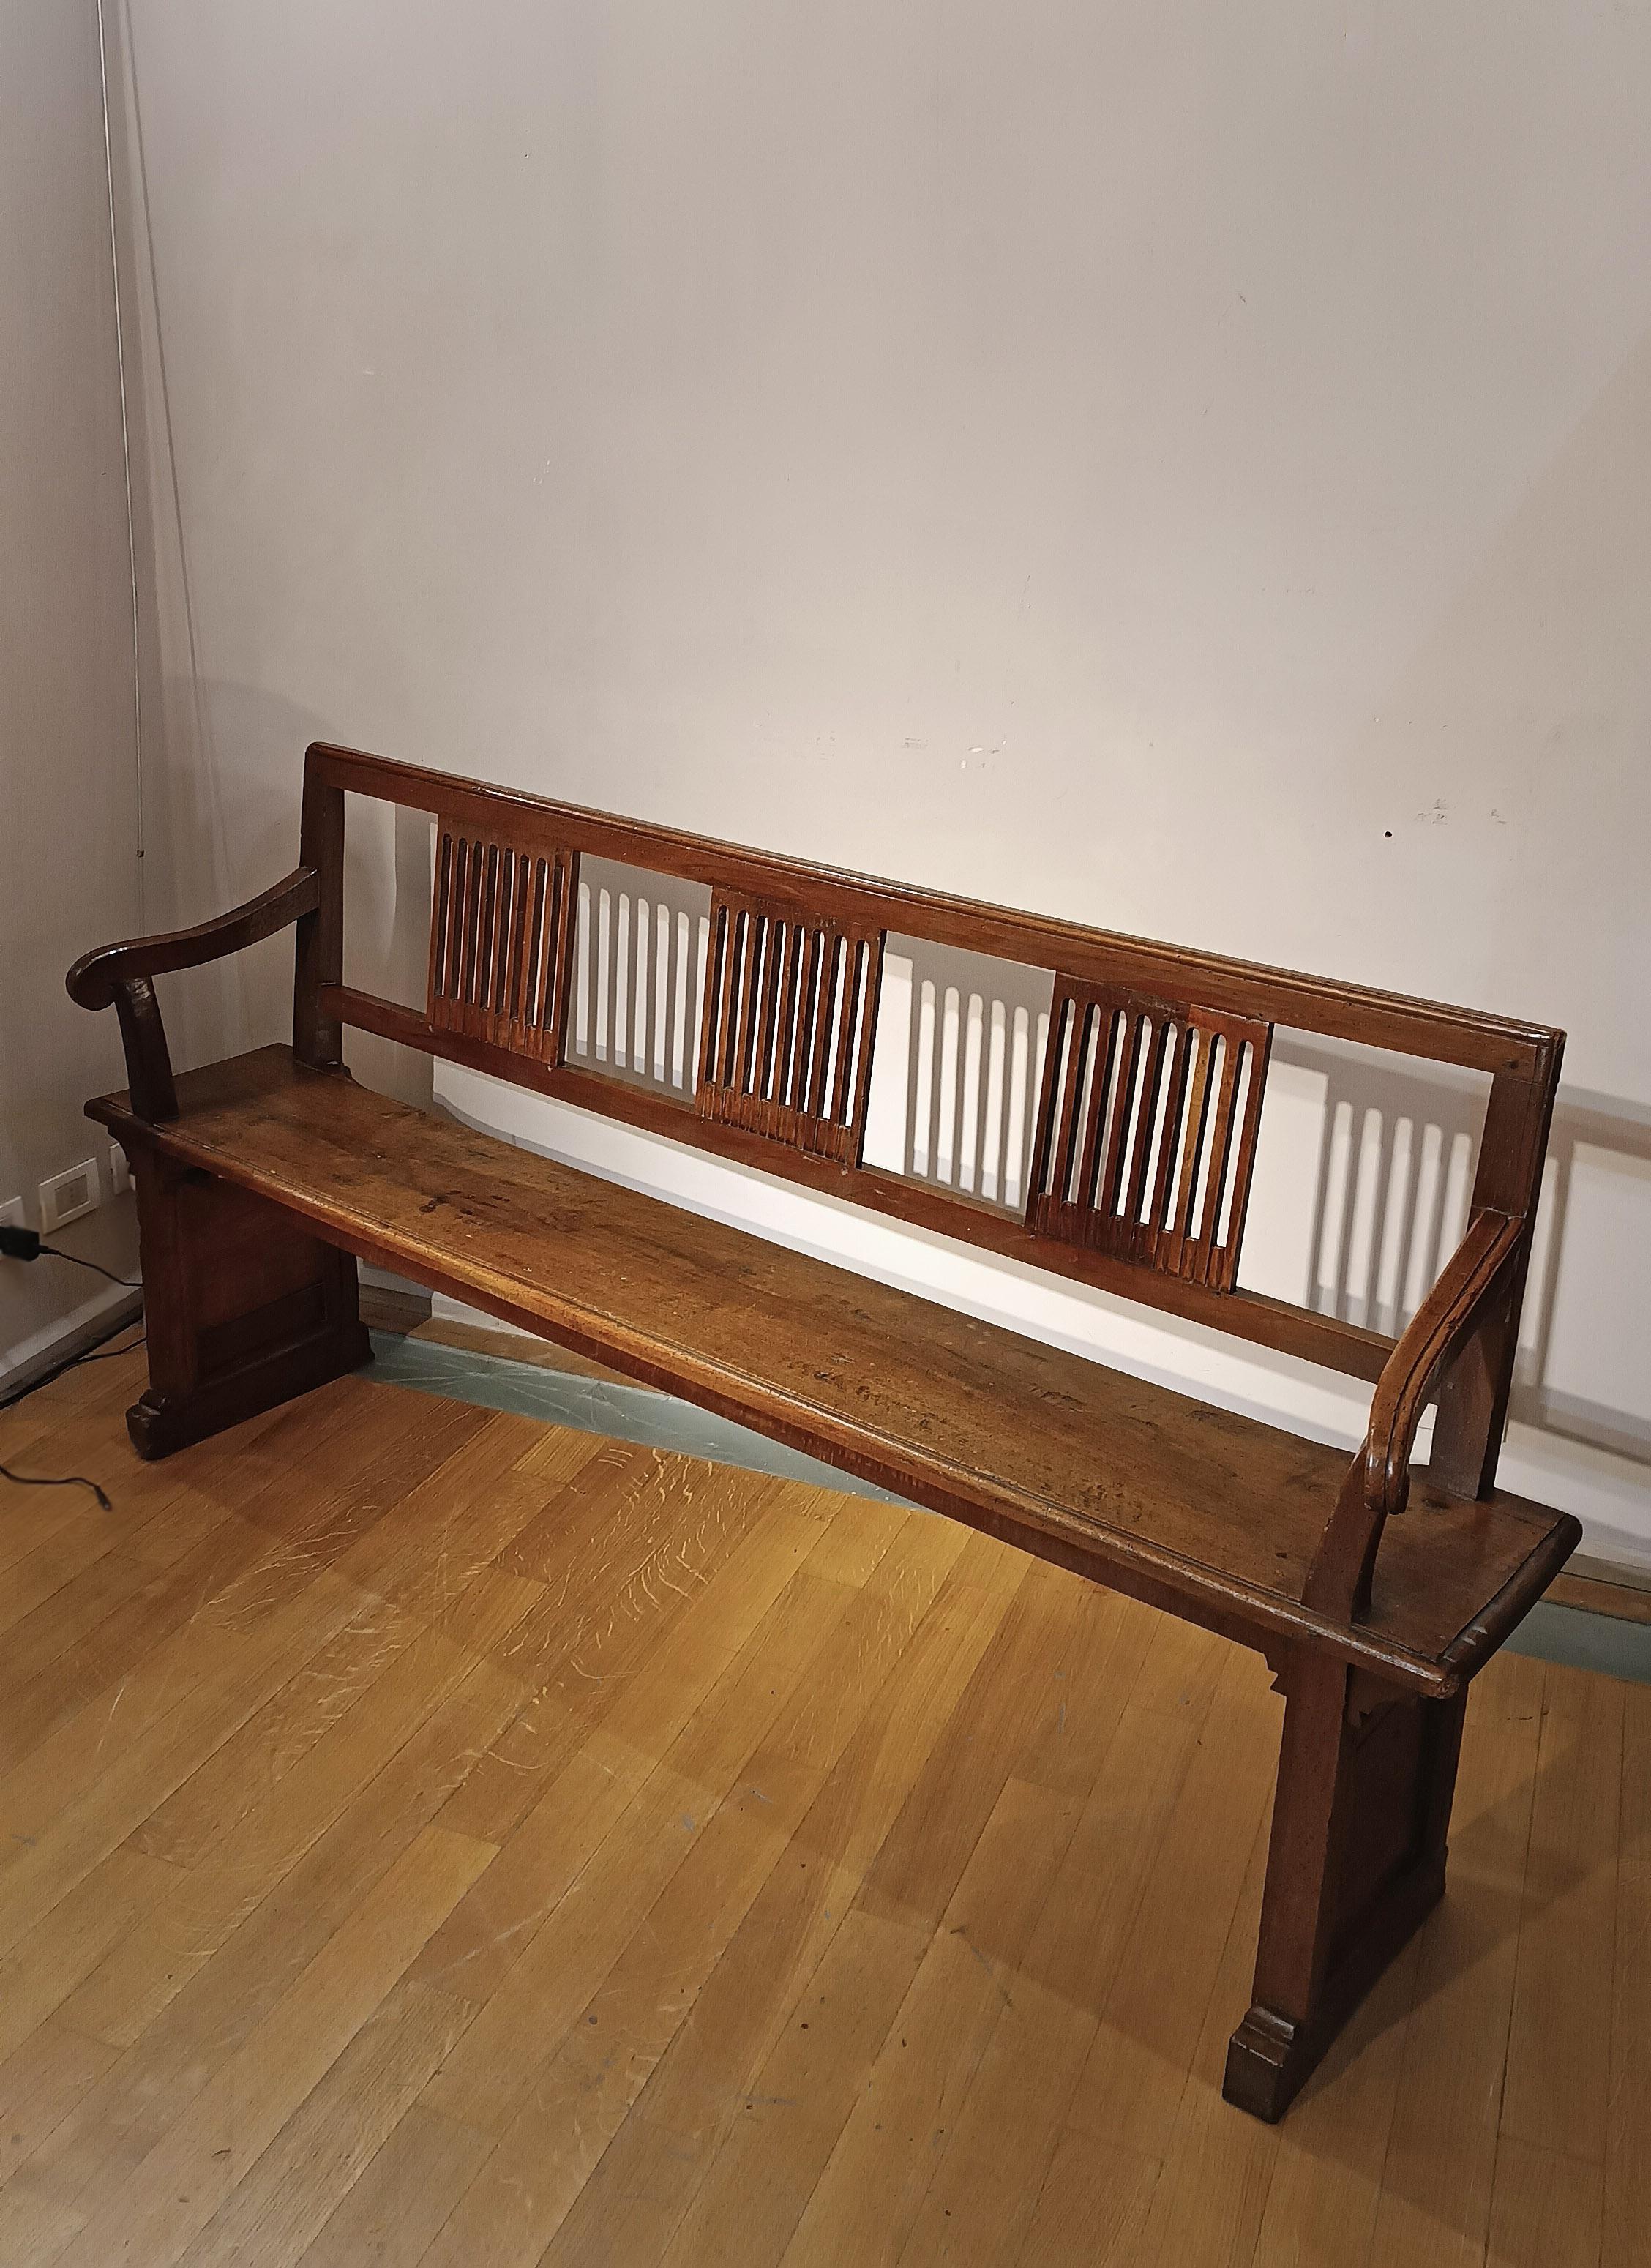 END OF THE 17th CENTURY WALNUT ENTRANCE BENCH  For Sale 2